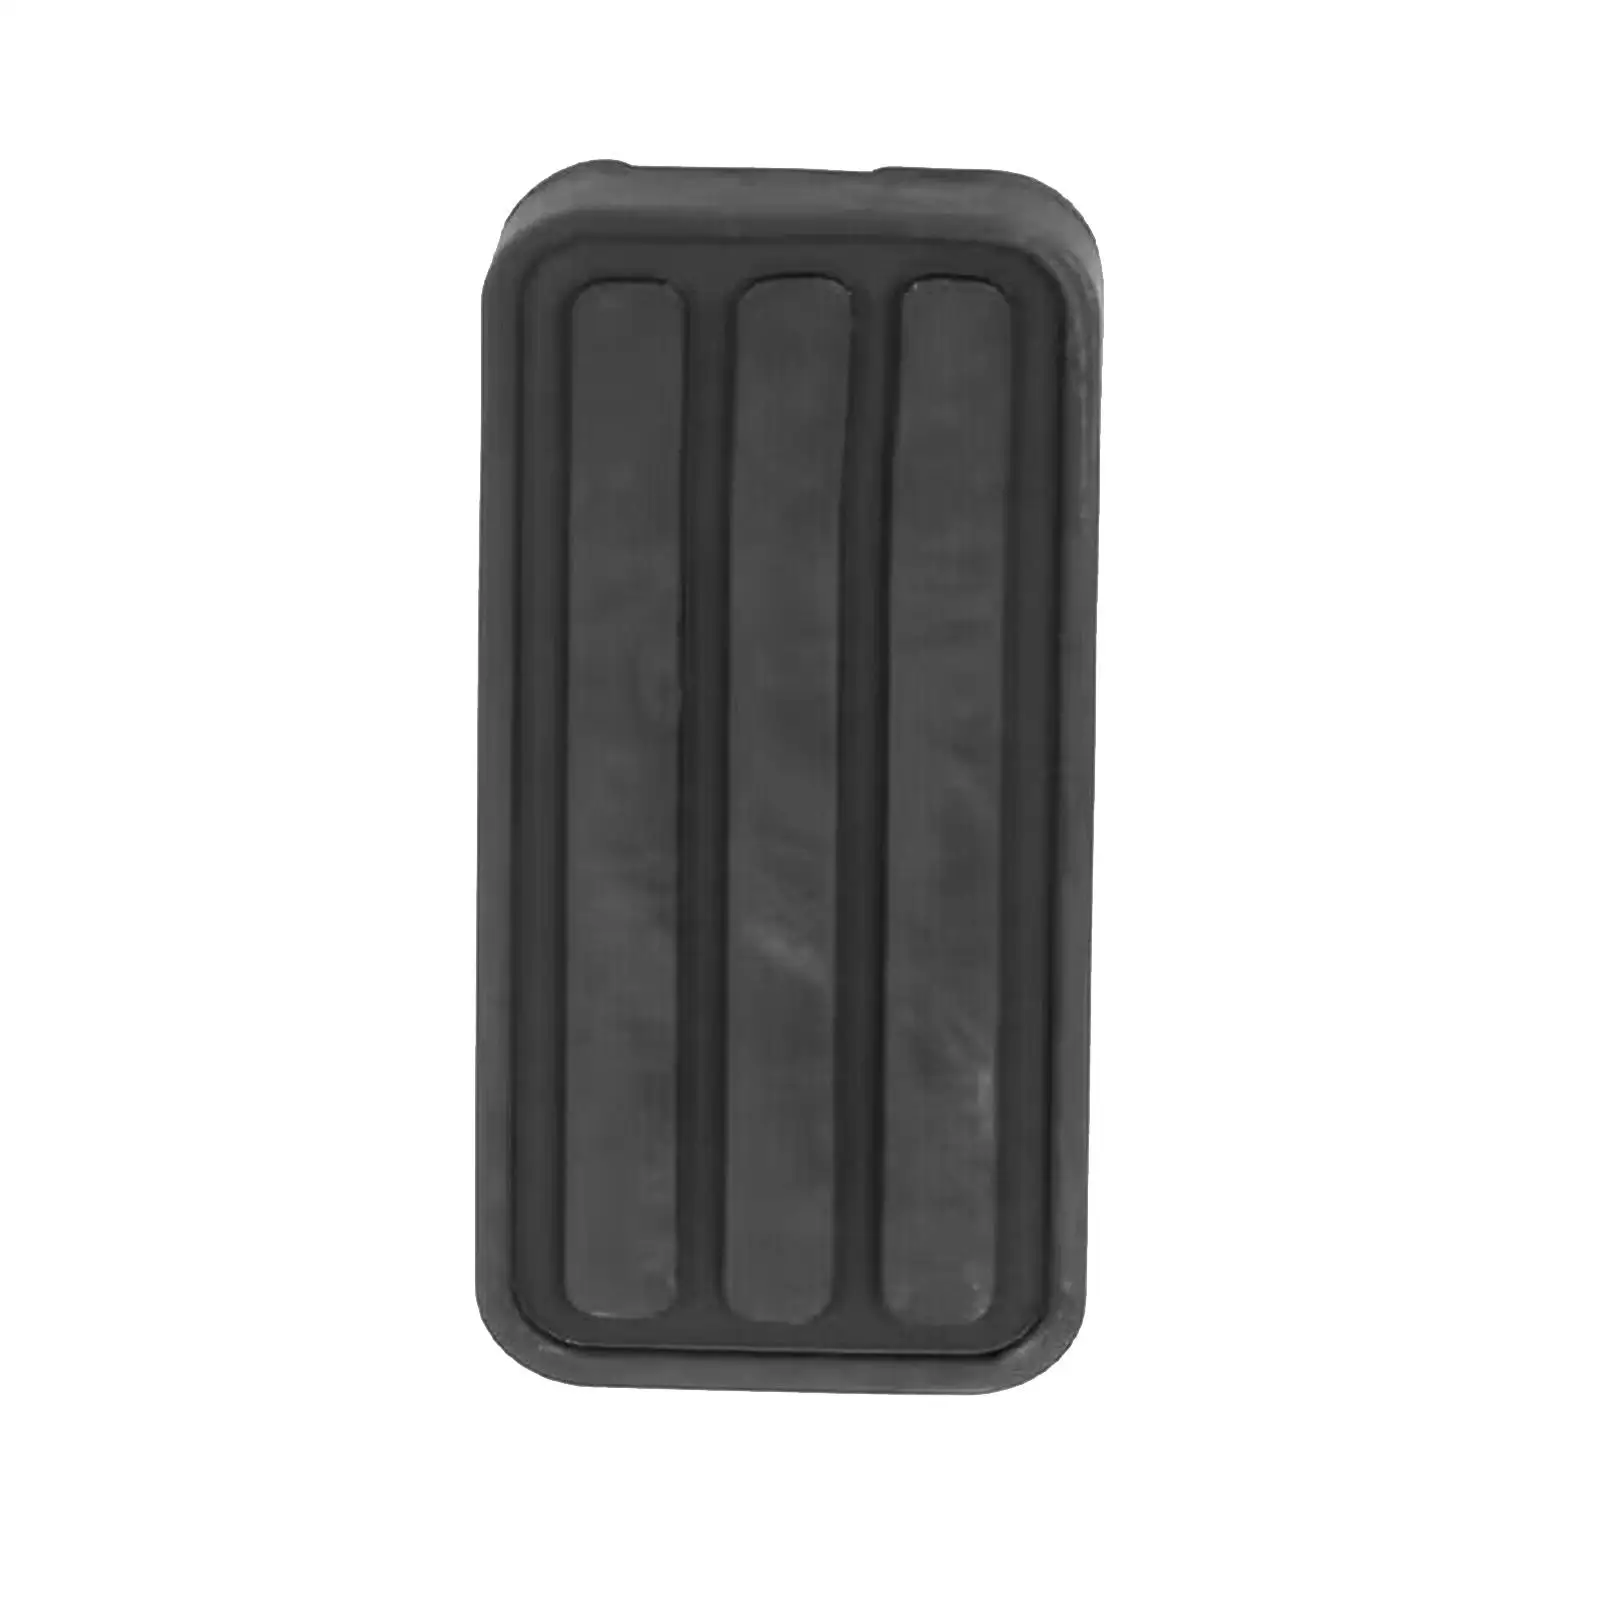 Car Accelerator Pedal Pad 171721647 for VW T4 Transporter 1990 to 2003